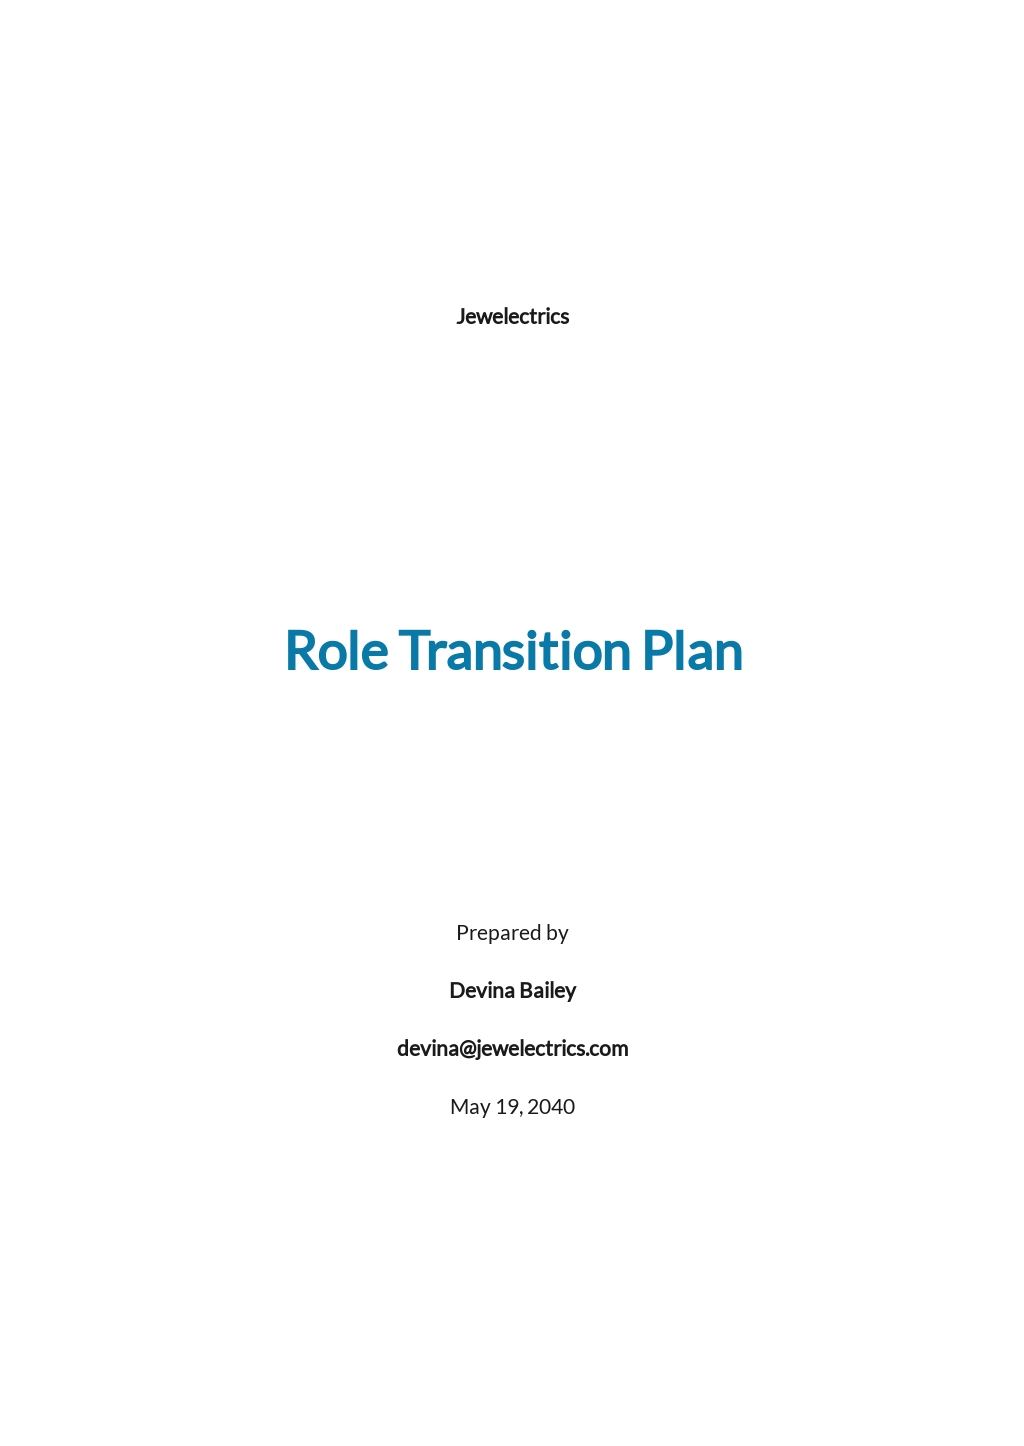 Role Transition Plan Template.jpe